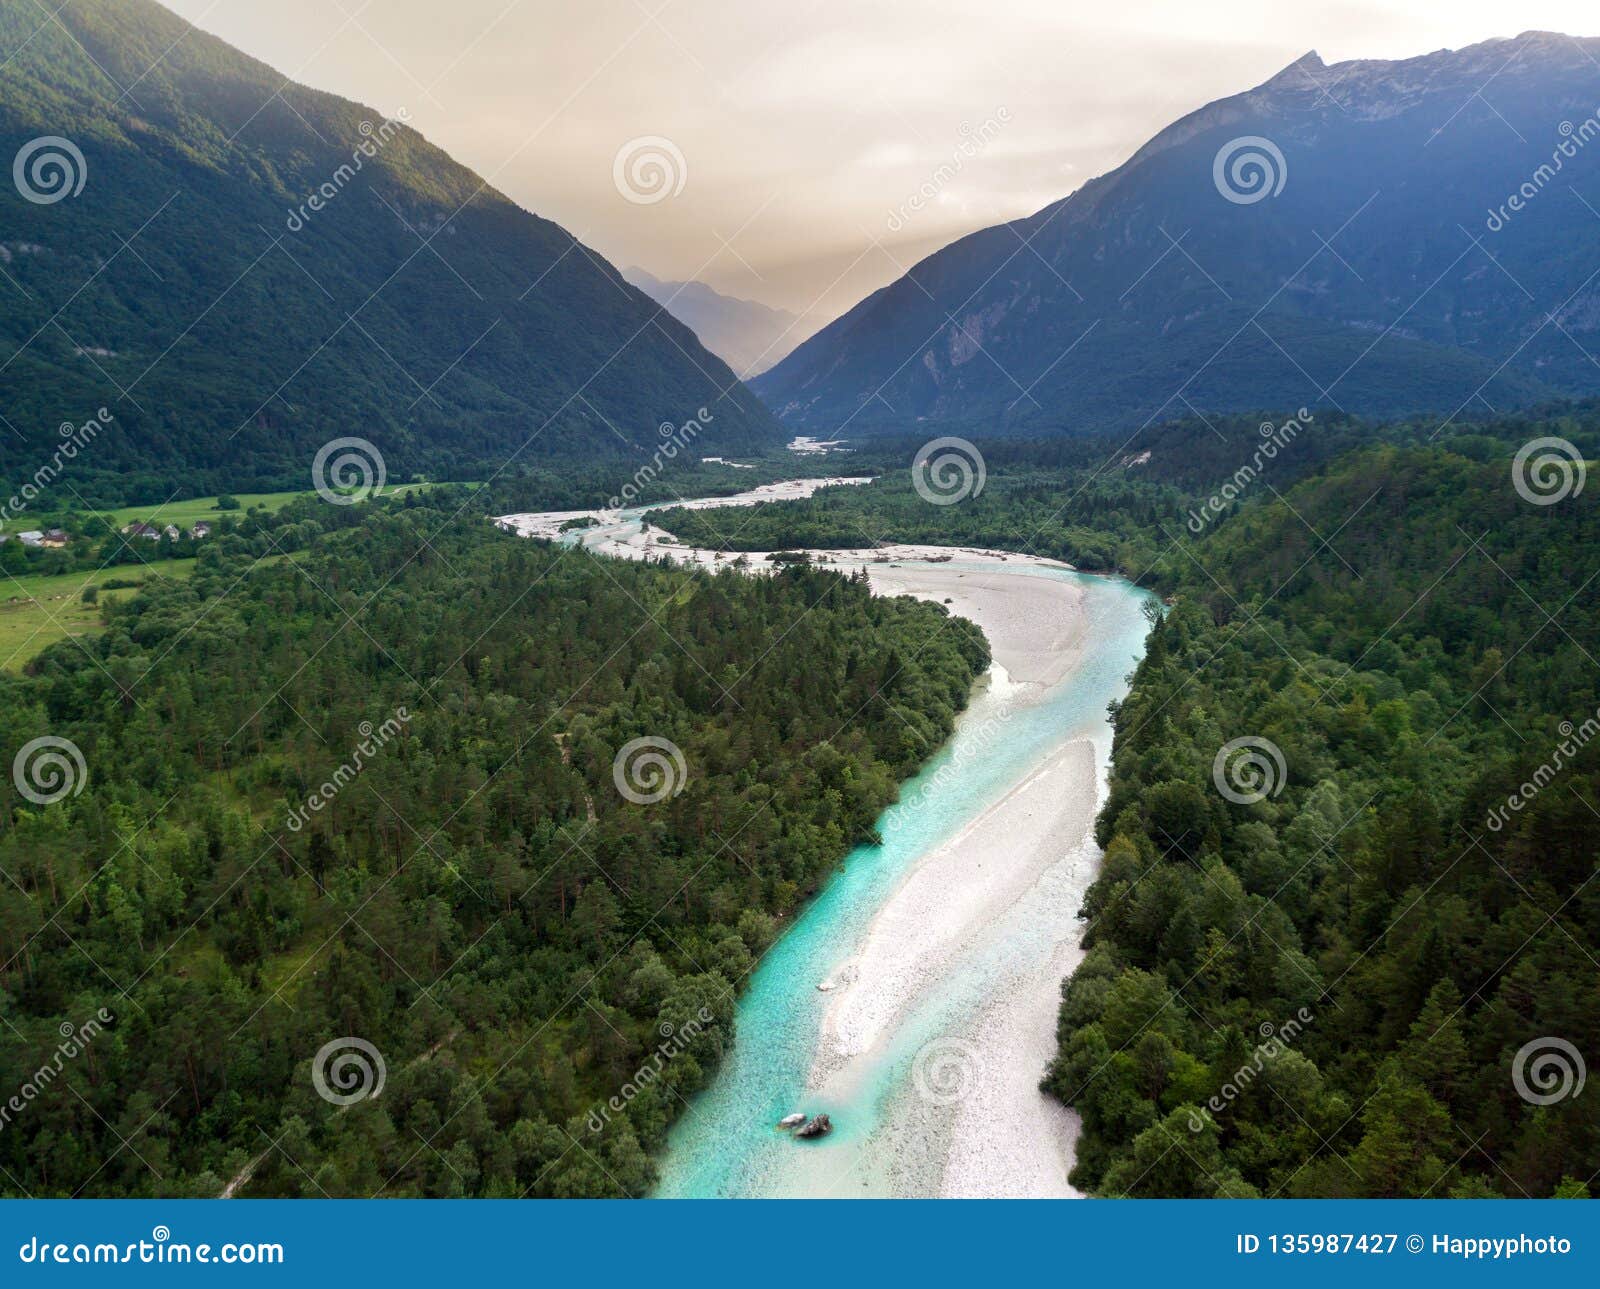 aerial view of soca river in julian alps at sunset. slovenia, soca valley, bovec district, europe